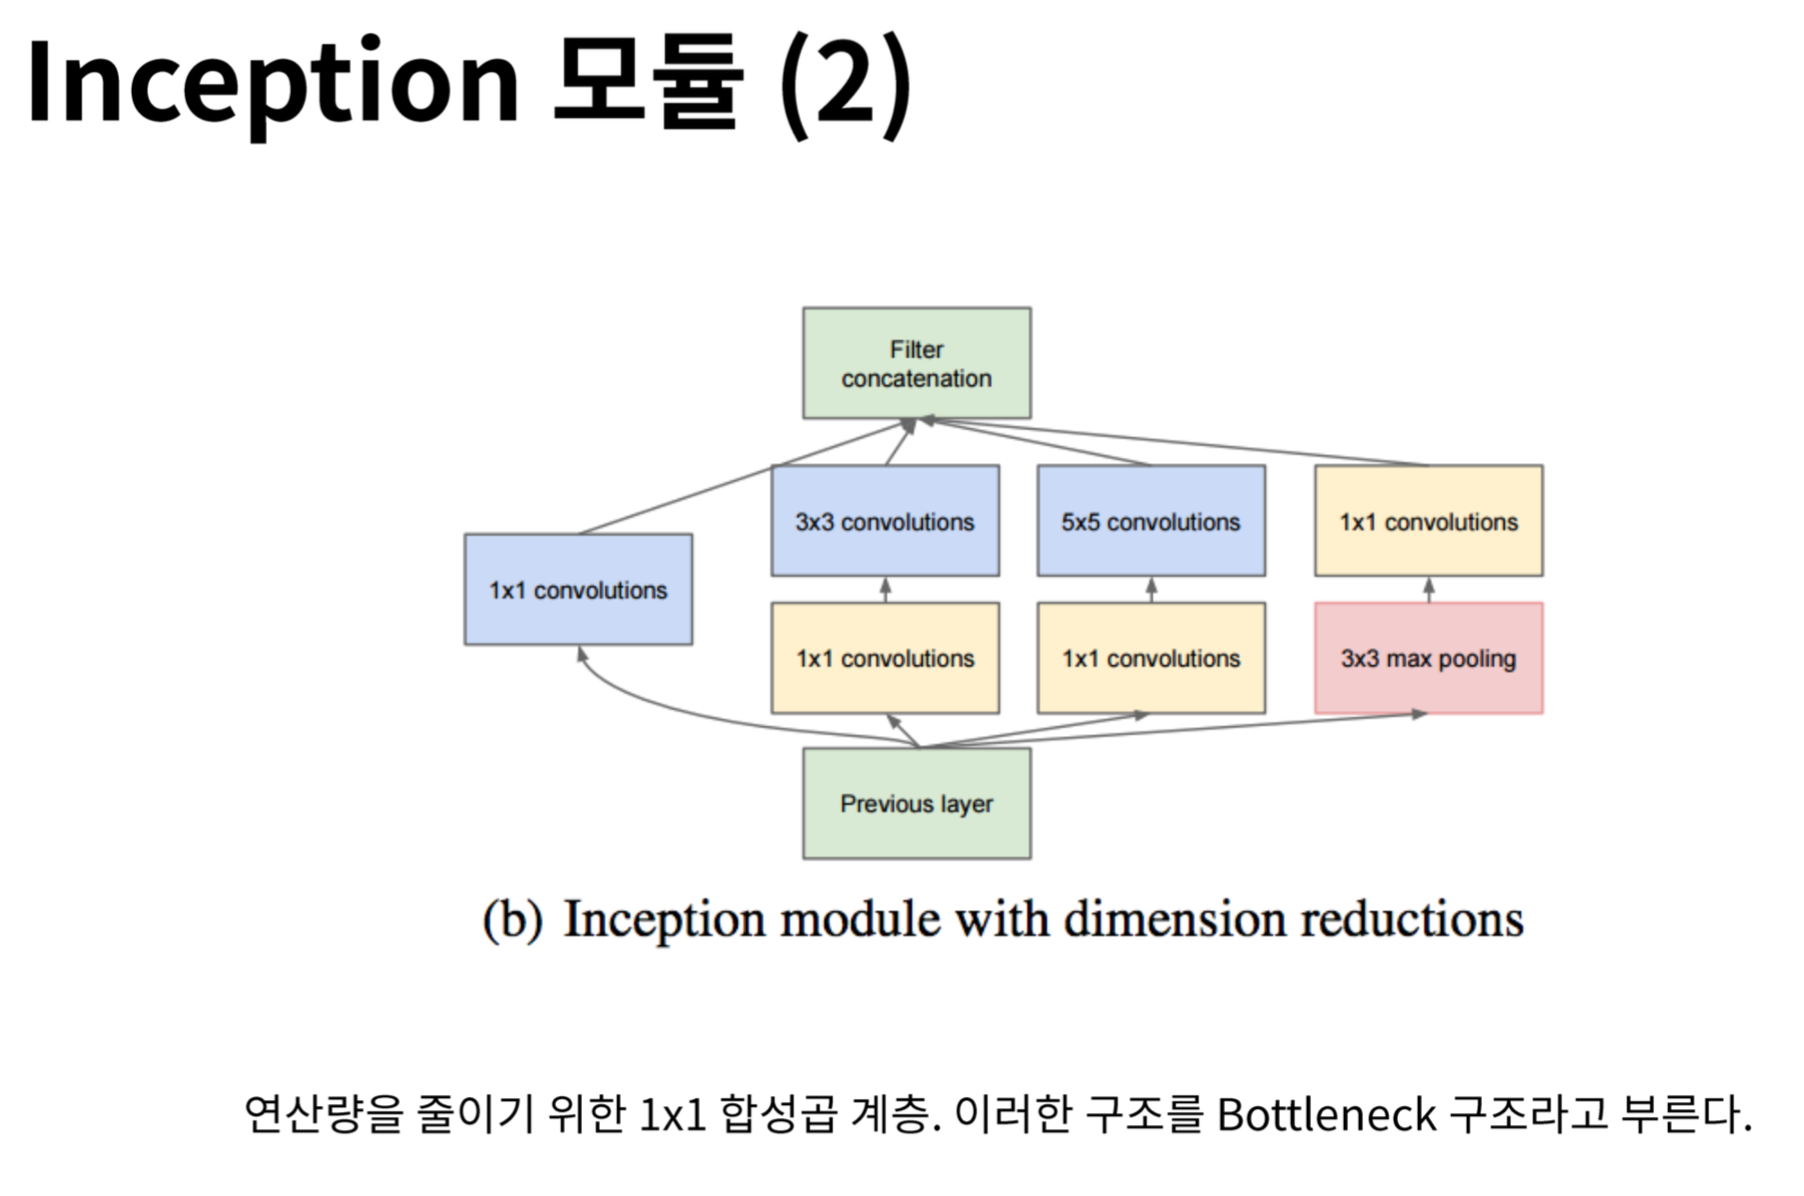 Inception 모듈(dimension reductions)